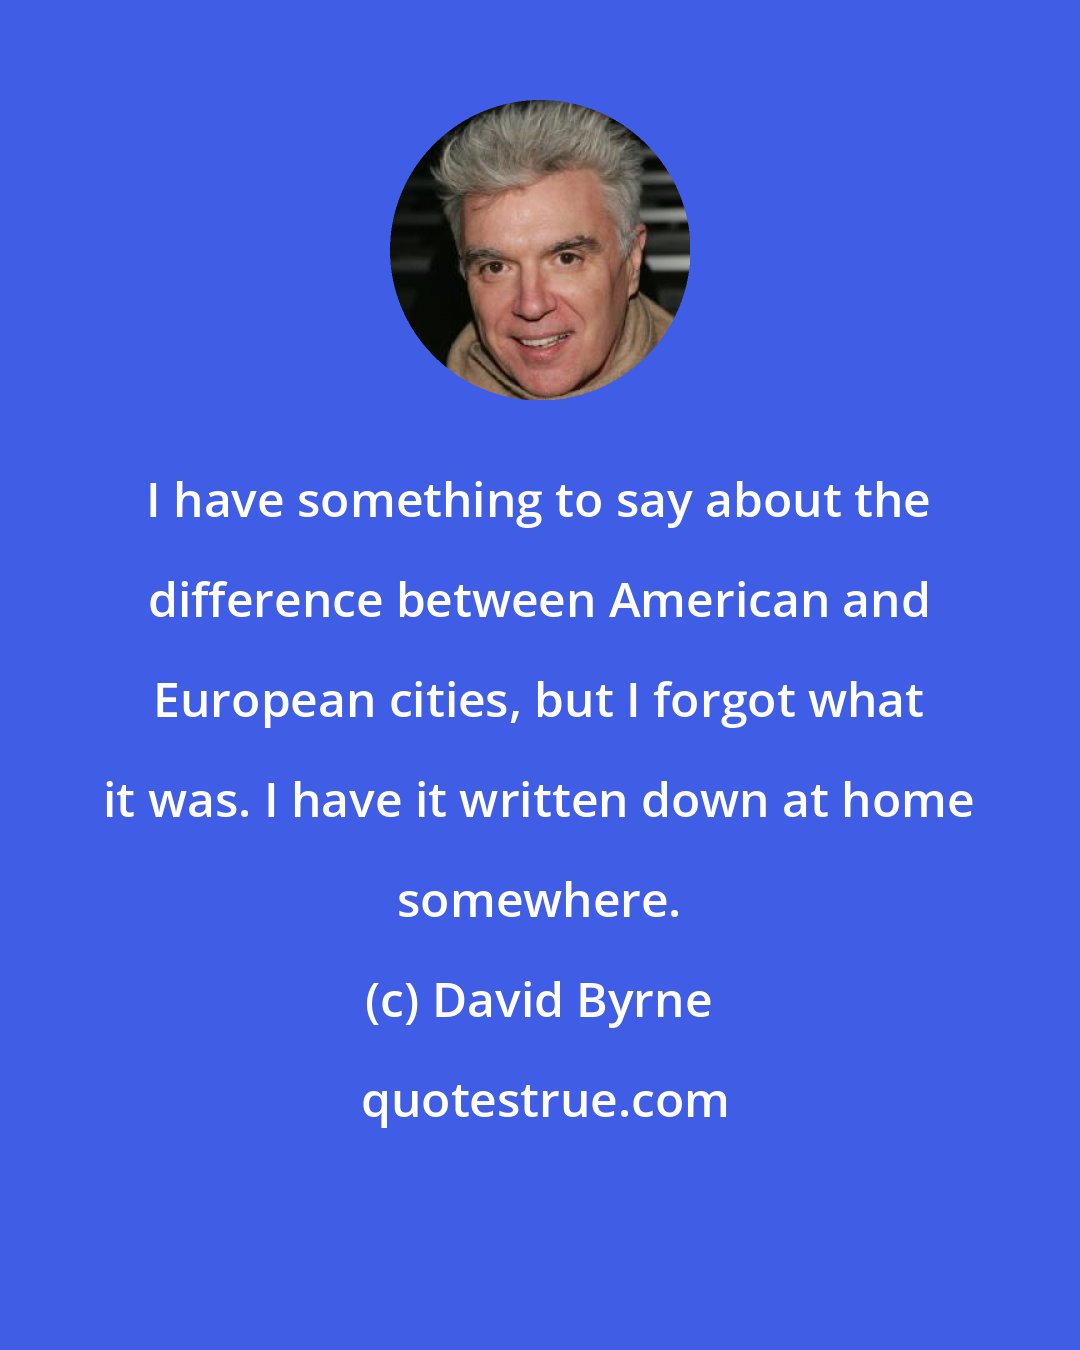 David Byrne: I have something to say about the difference between American and European cities, but I forgot what it was. I have it written down at home somewhere.